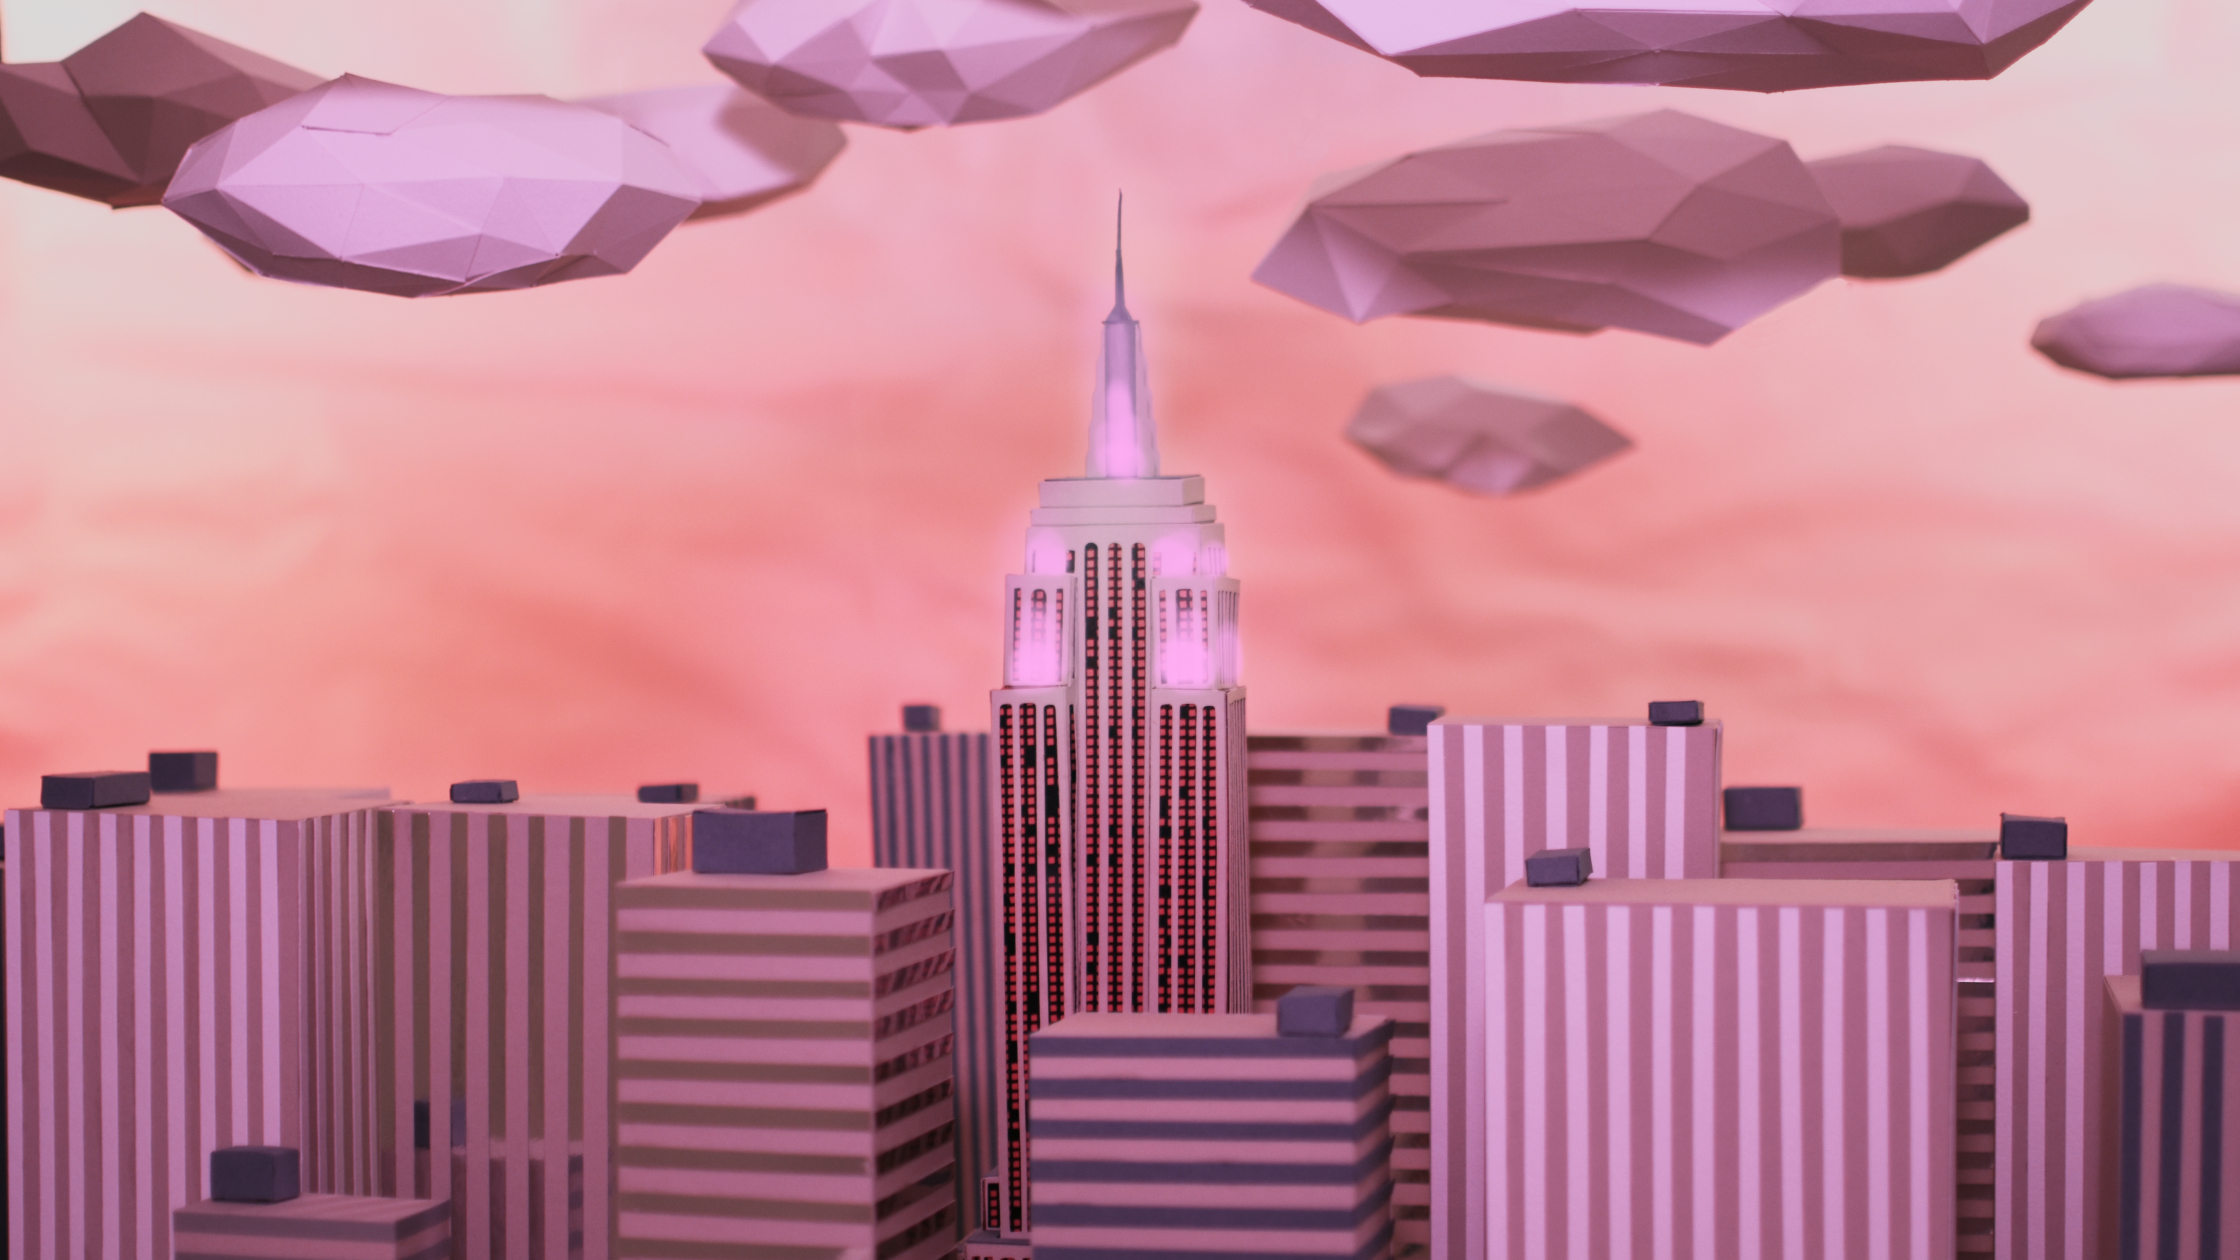 STAGE BACKGROUNDS 2 - NEW YORK.jpg